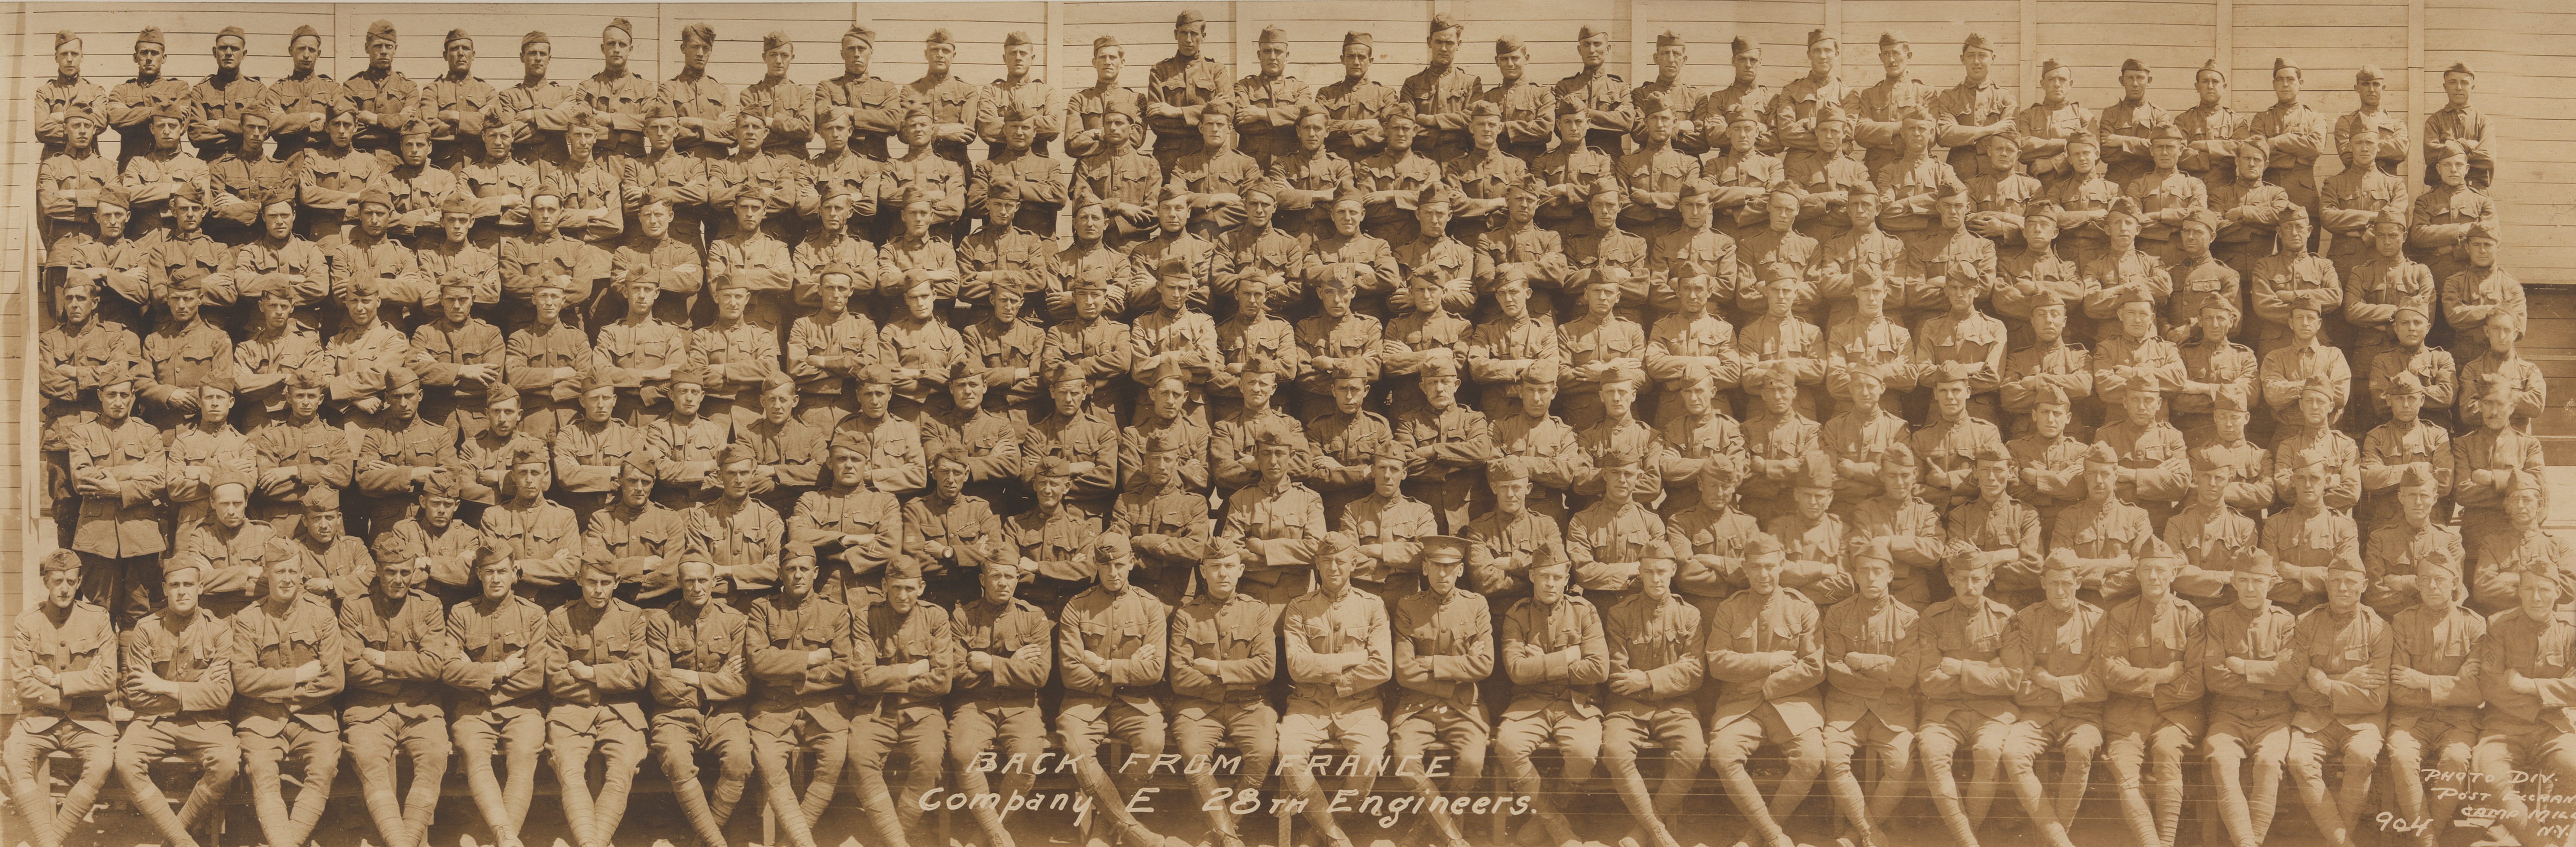 “Back from France, Company E, 28th Engineers, WWI
                              Photo Div. Post Exchange, Campy Mills, NY 904”